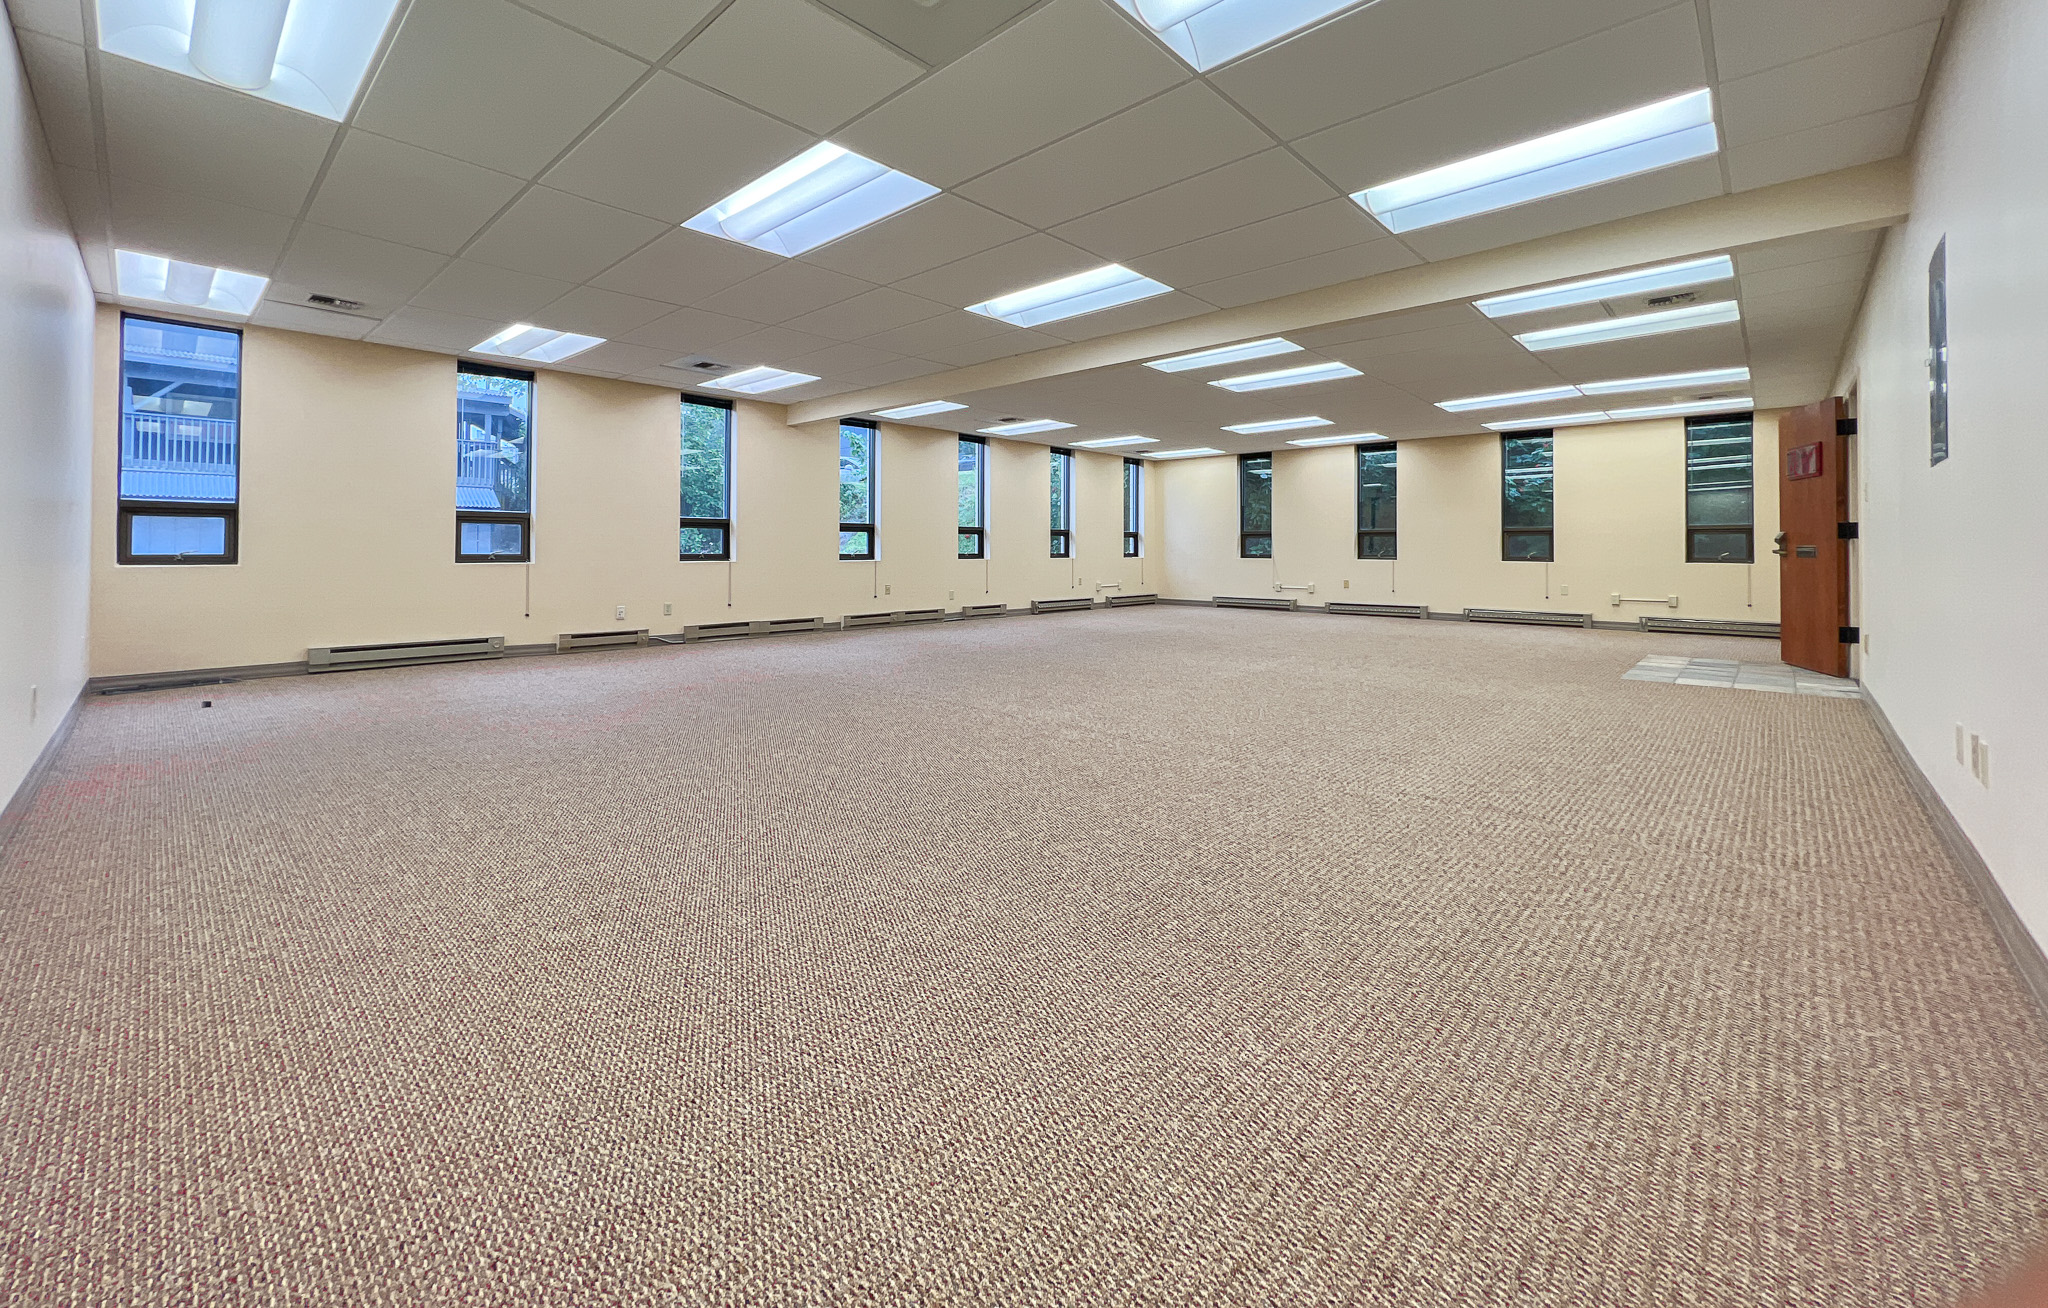 Interior of RSD Properties' Suite 102 at the 750 W 2nd Avenue office building in Anchorage, Alaska. There are several windows all around, tan carpeting and a drop ceiling